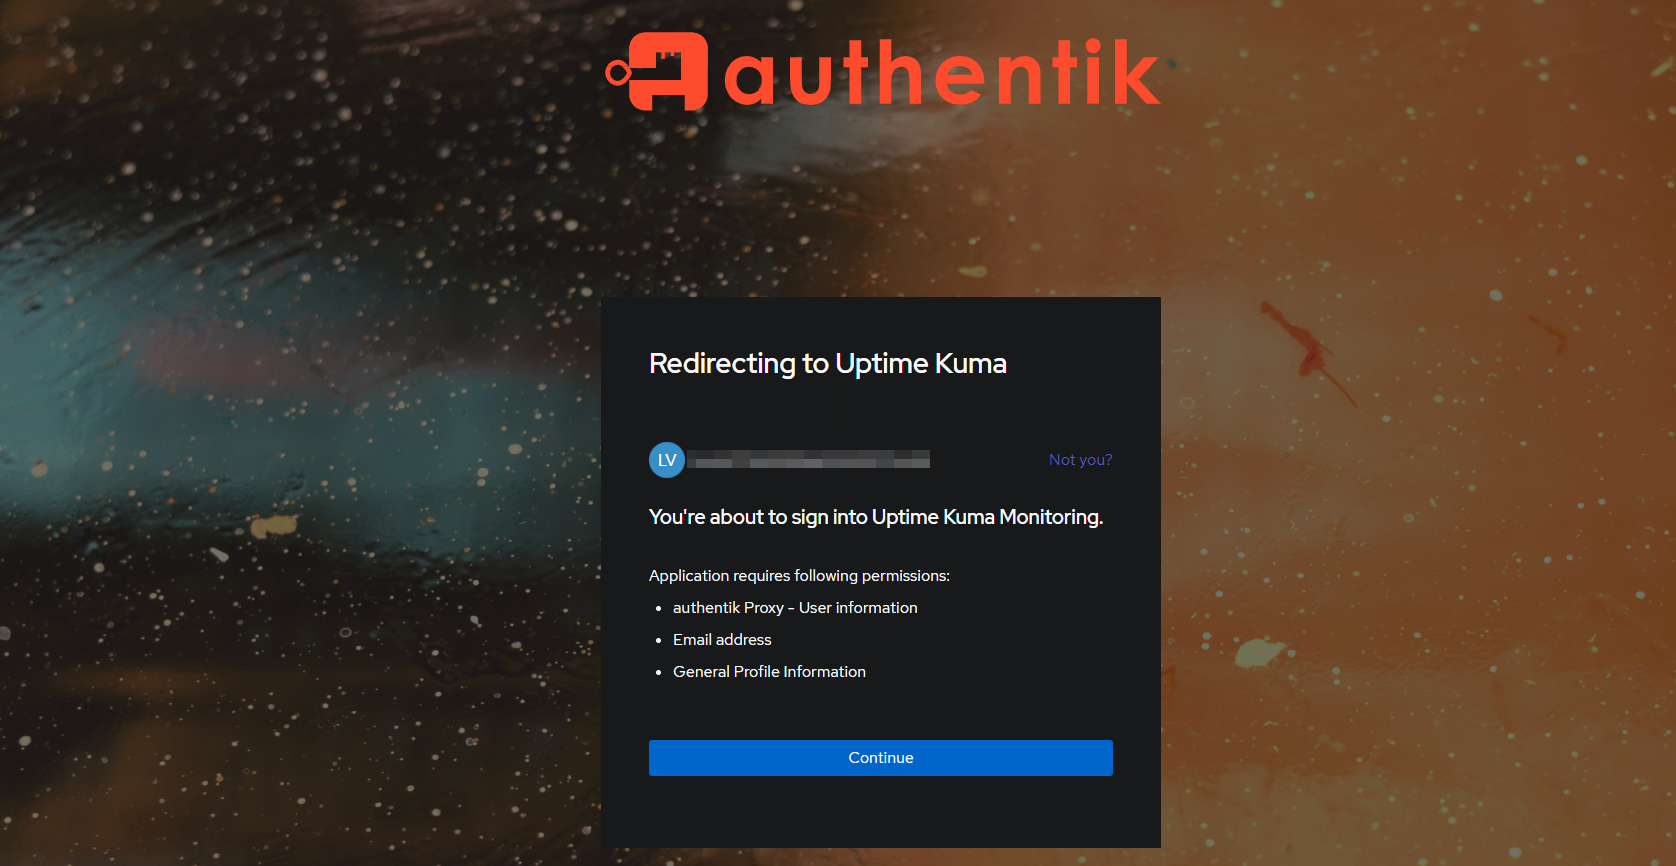 Protecting Web Services with Authentik, Traefik and Azure AD